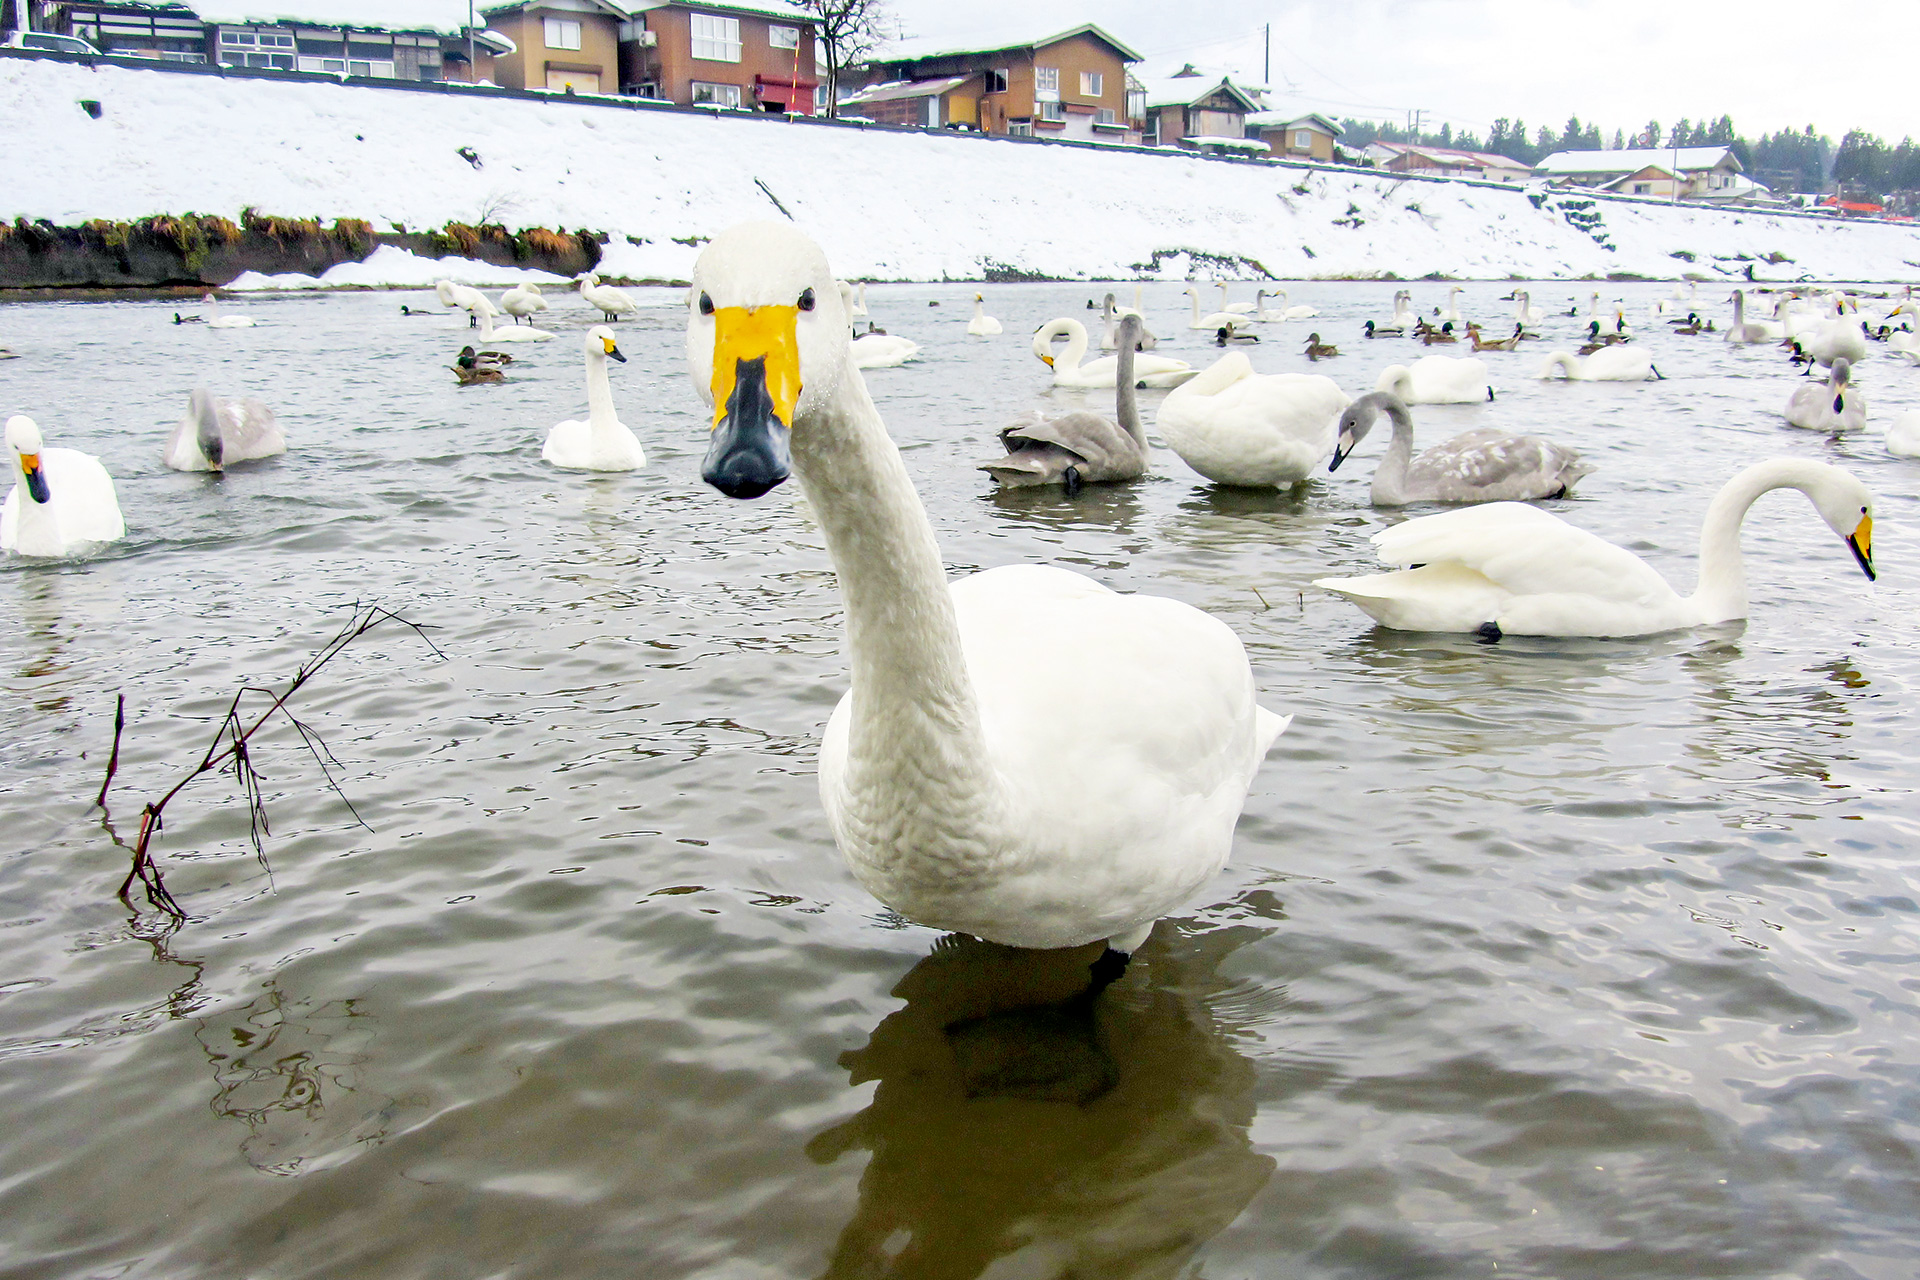 Meet the swans passing the winter on the river